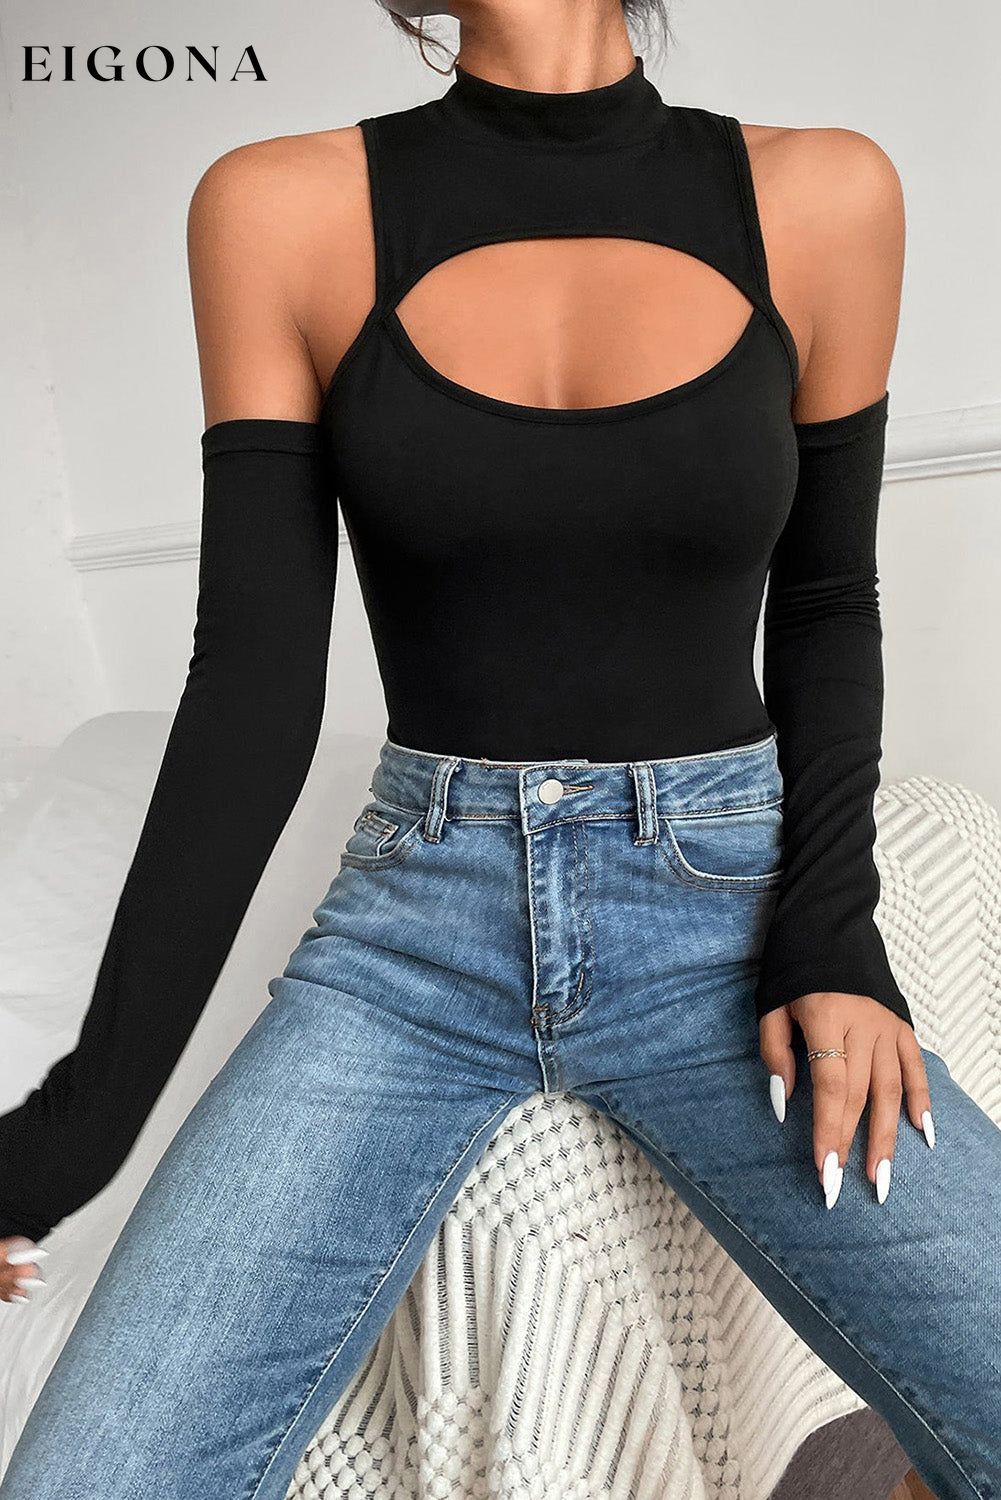 Black High Neck Cut Out Front Bodysuit clothes cut out bodysuit long sleeve bodysuit Occasion Rock & Music Print Solid Color Season Spring shirt Size S To 2XL Style Feminine top